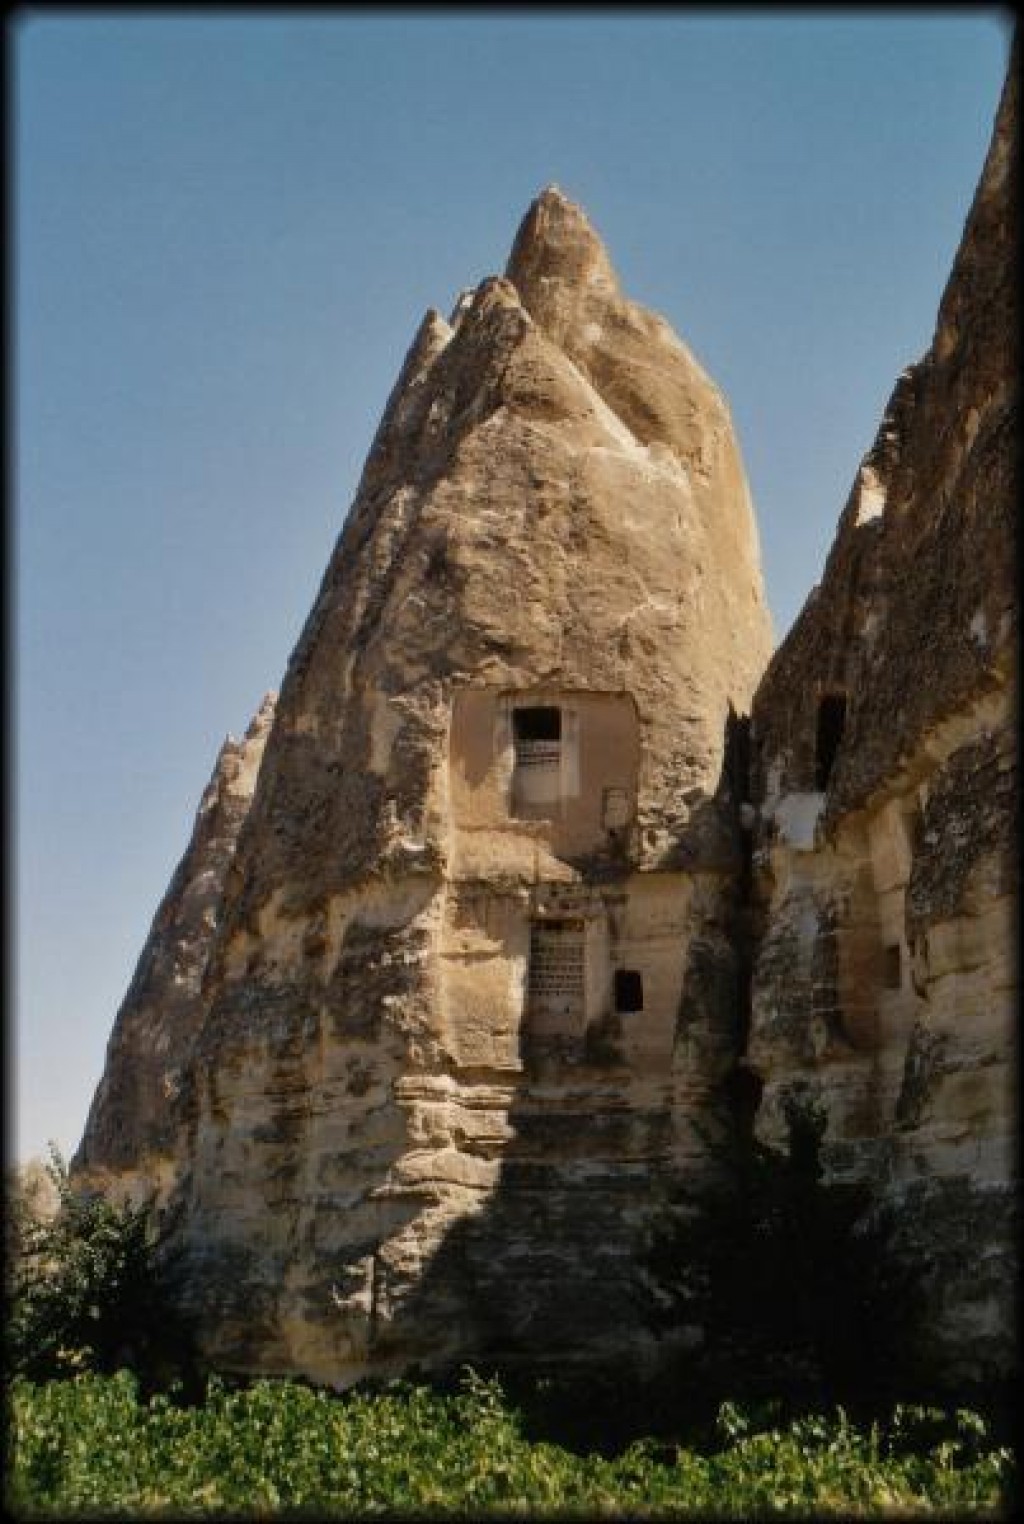 After Pamukkale we headed to Goreme in Cappadocia, 